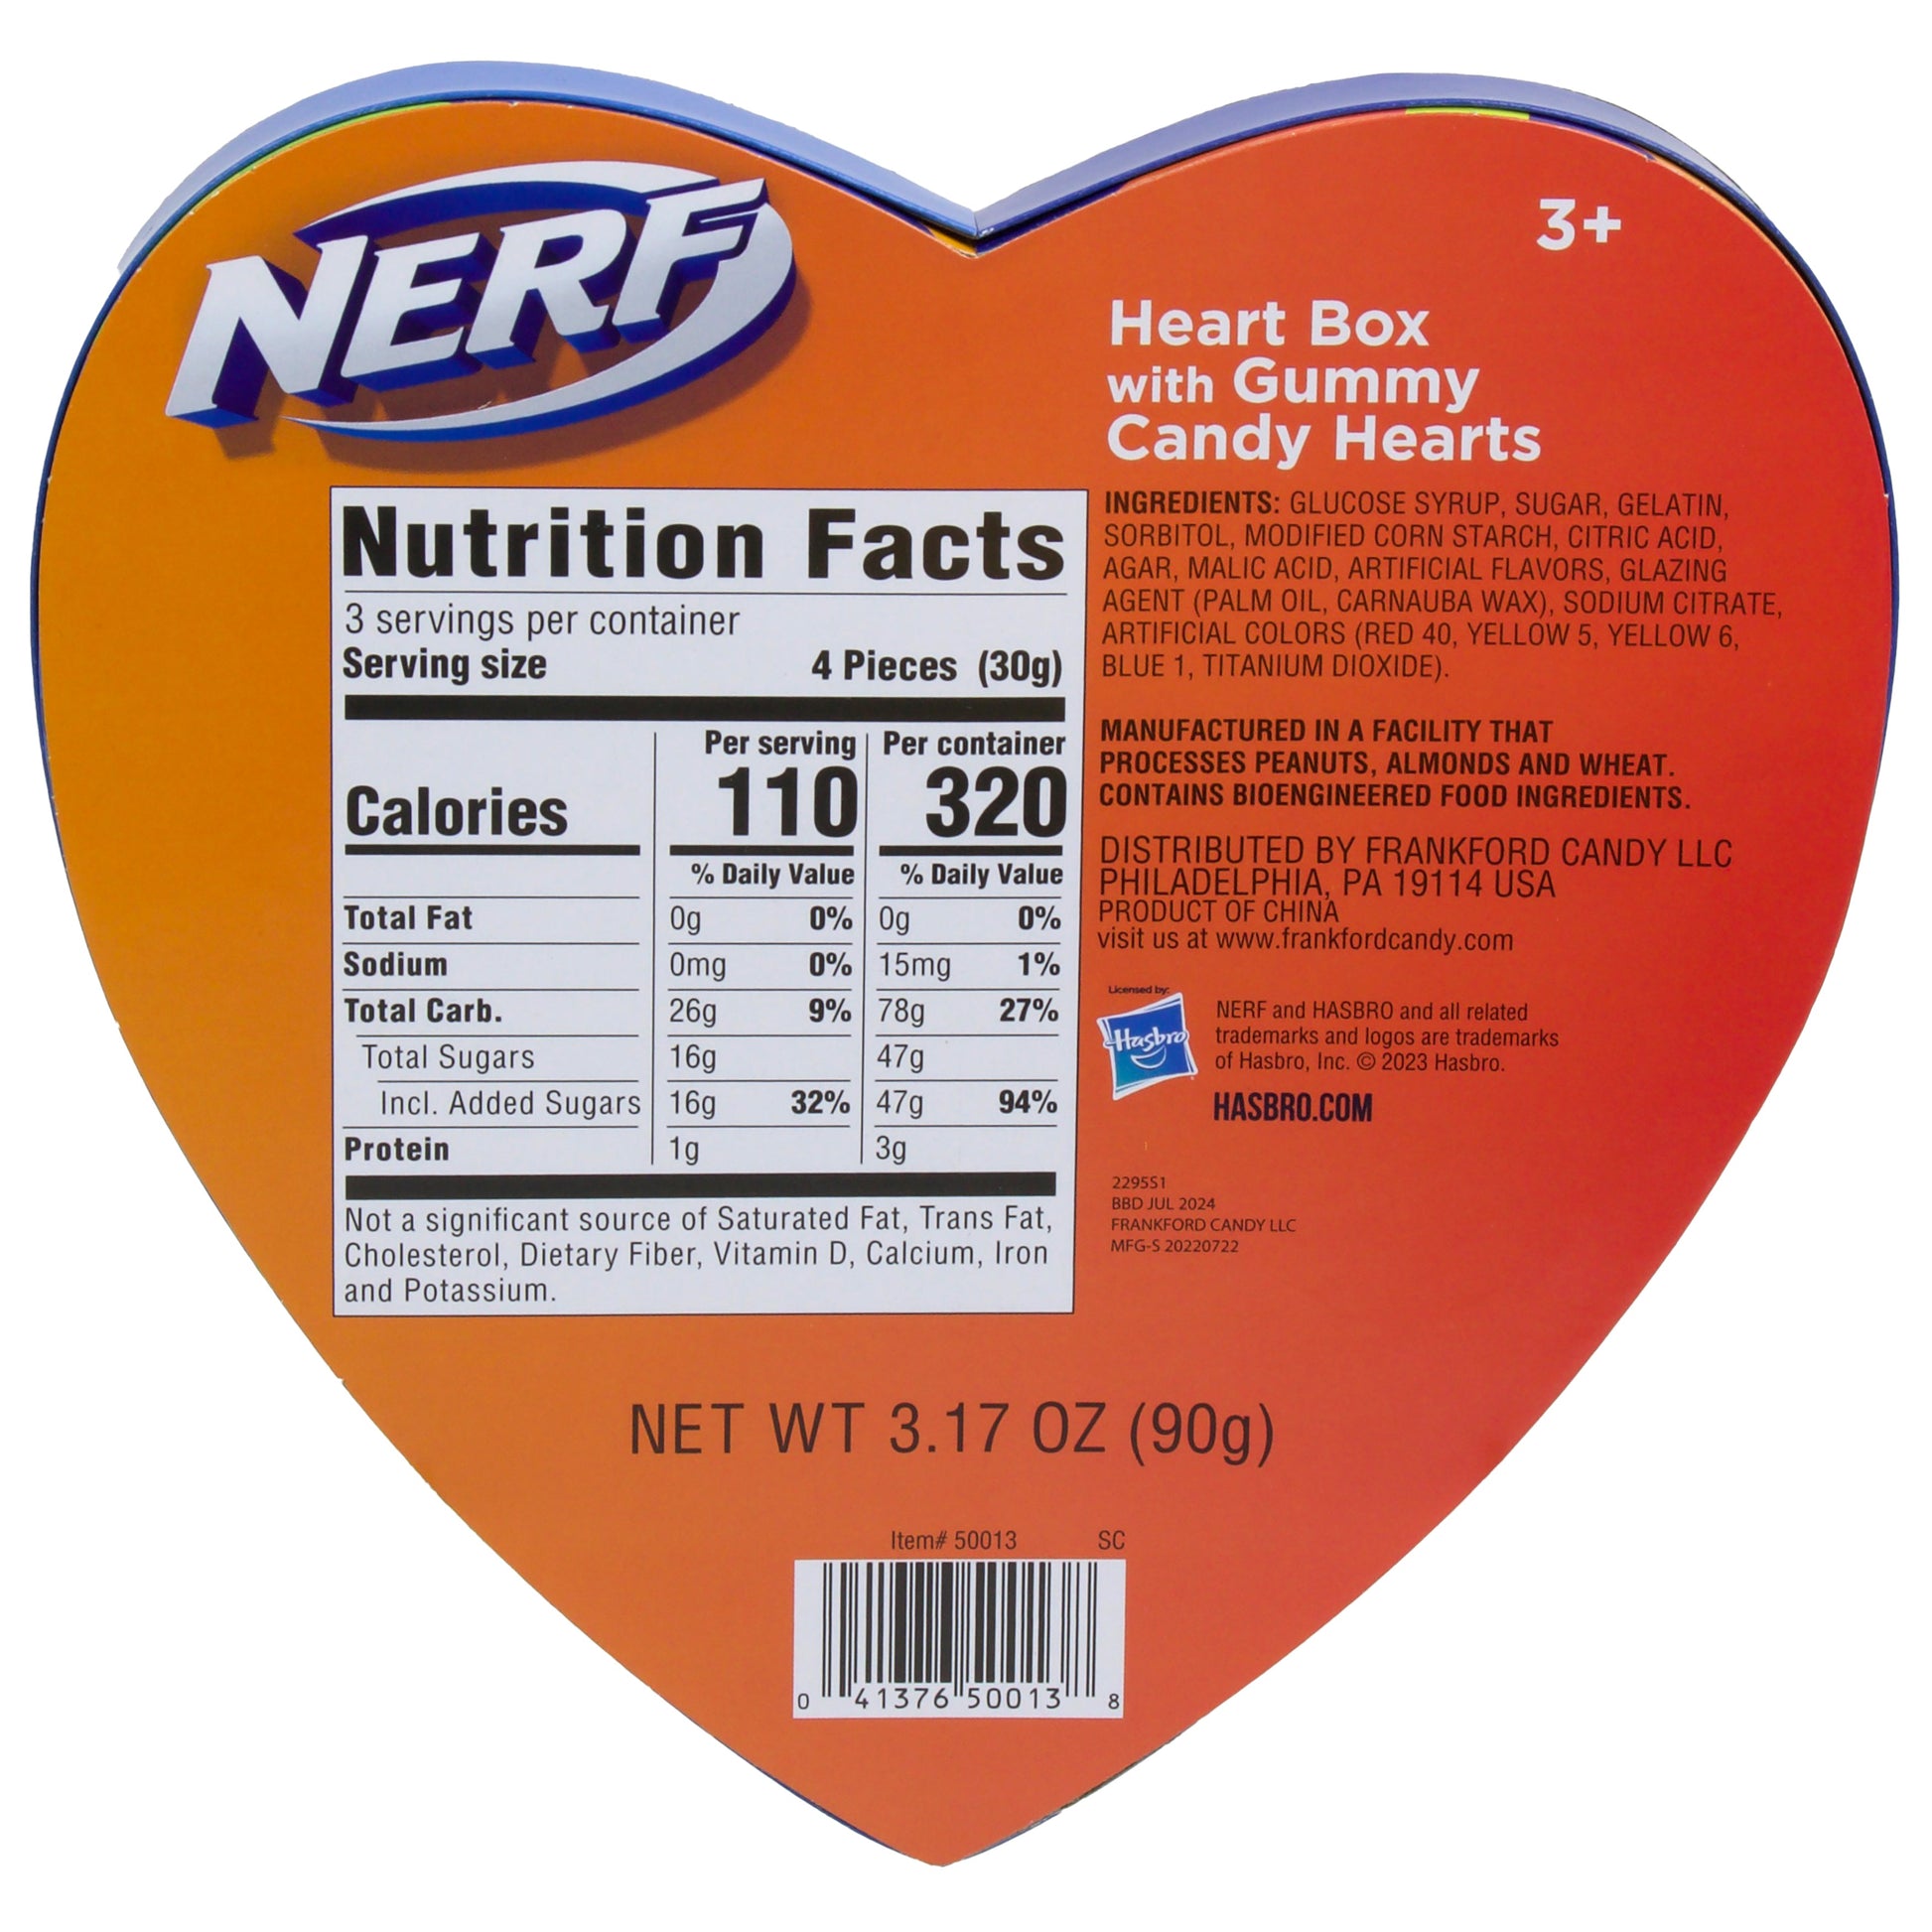 back of heart shaped box with nutrition facts and ingredients